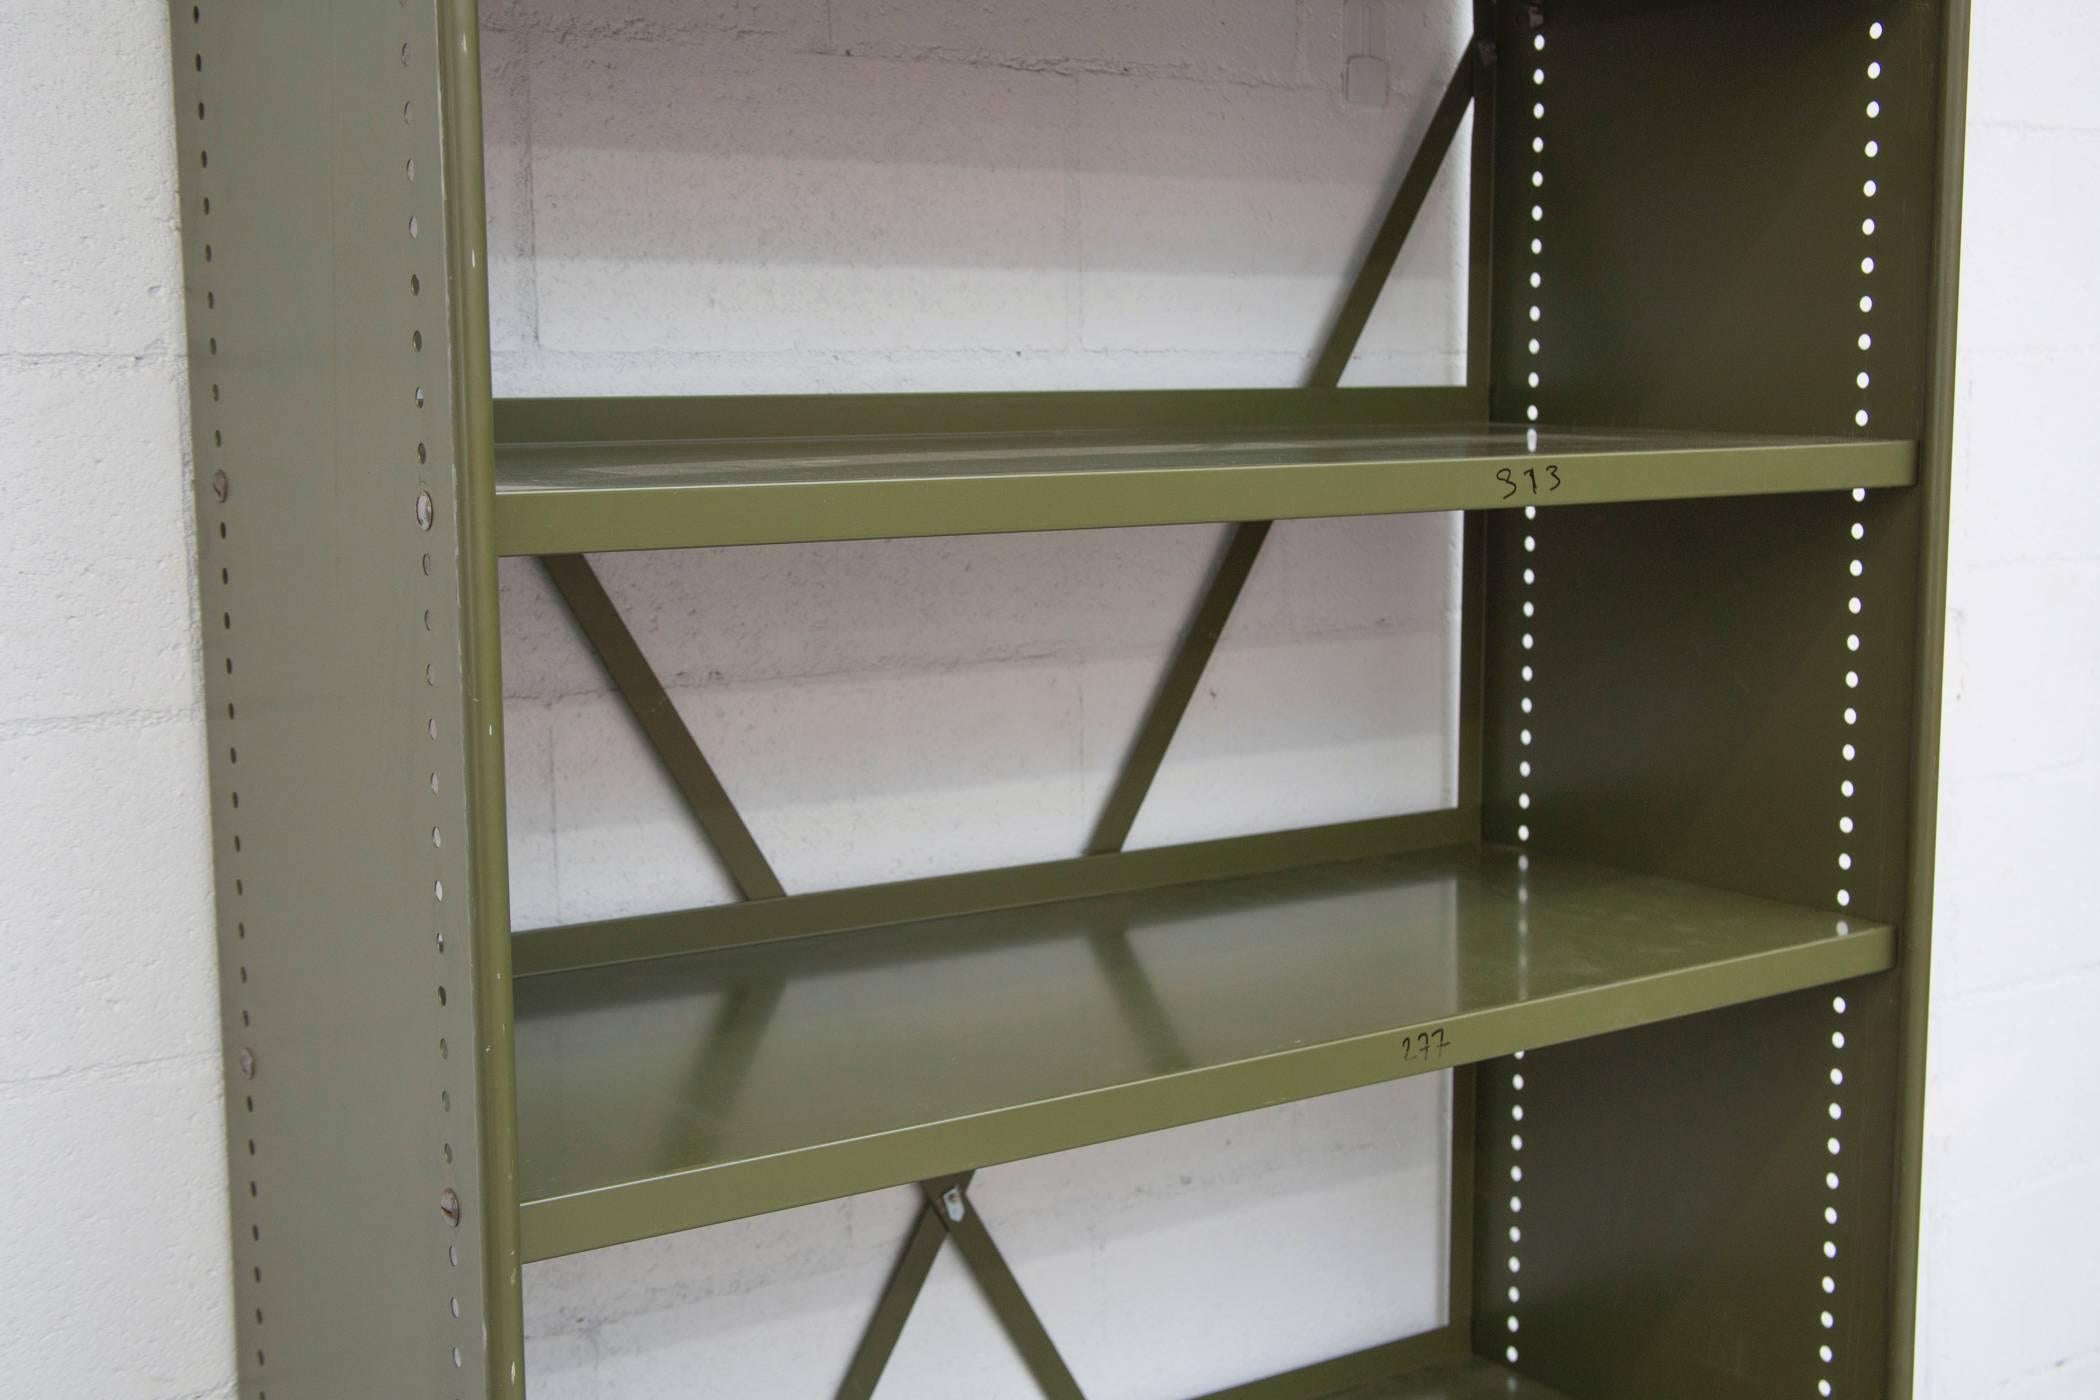 Extra tall Industrial bookshelf in great army green finish. Original vintage condition, with visible wear and signs of use. Some scratching and slight denting, consistent with its age and usage. Shelves are adjustable. Two available.